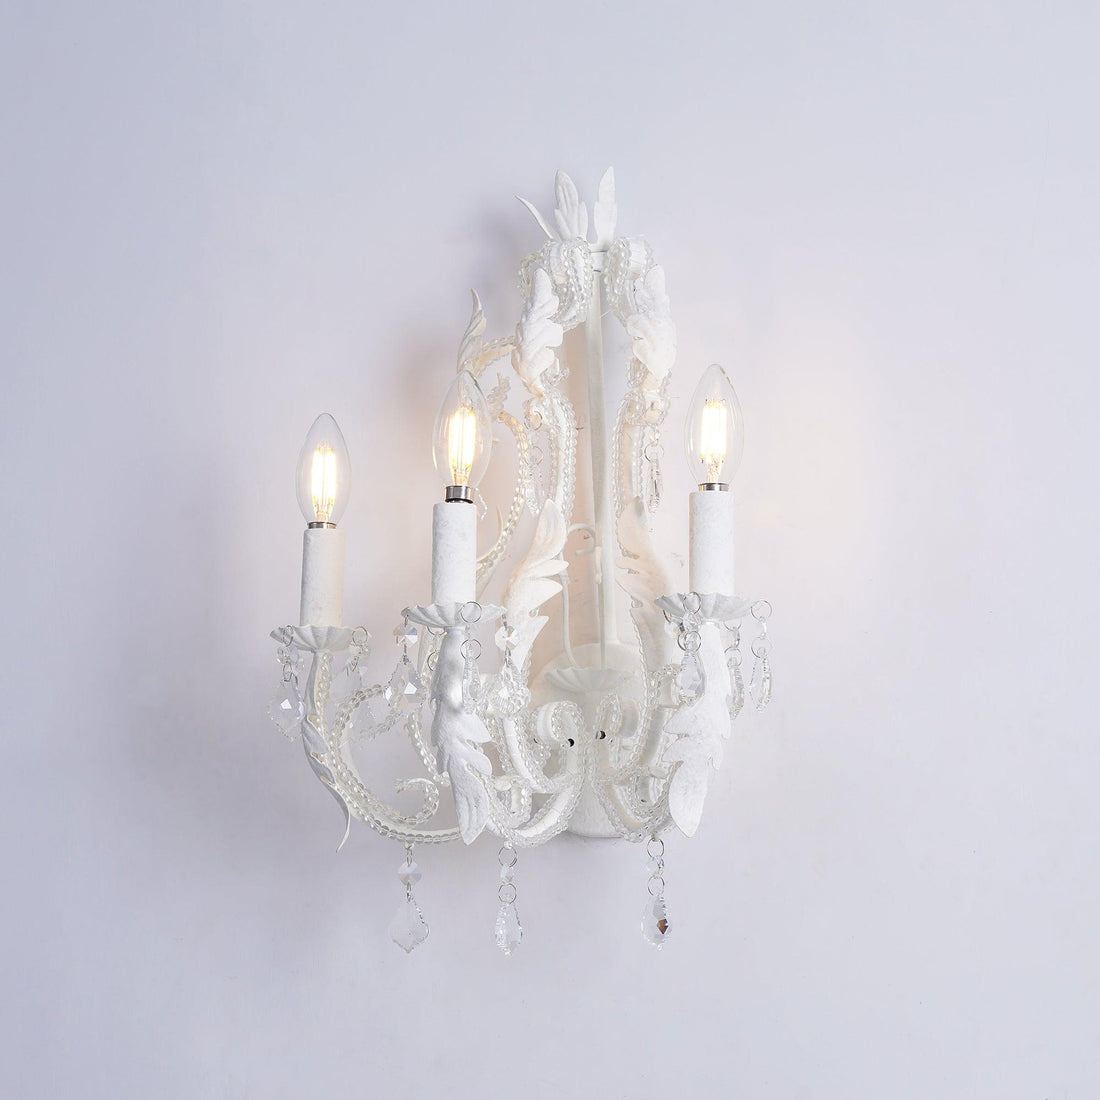 Candle Style Holder Wall Sconce